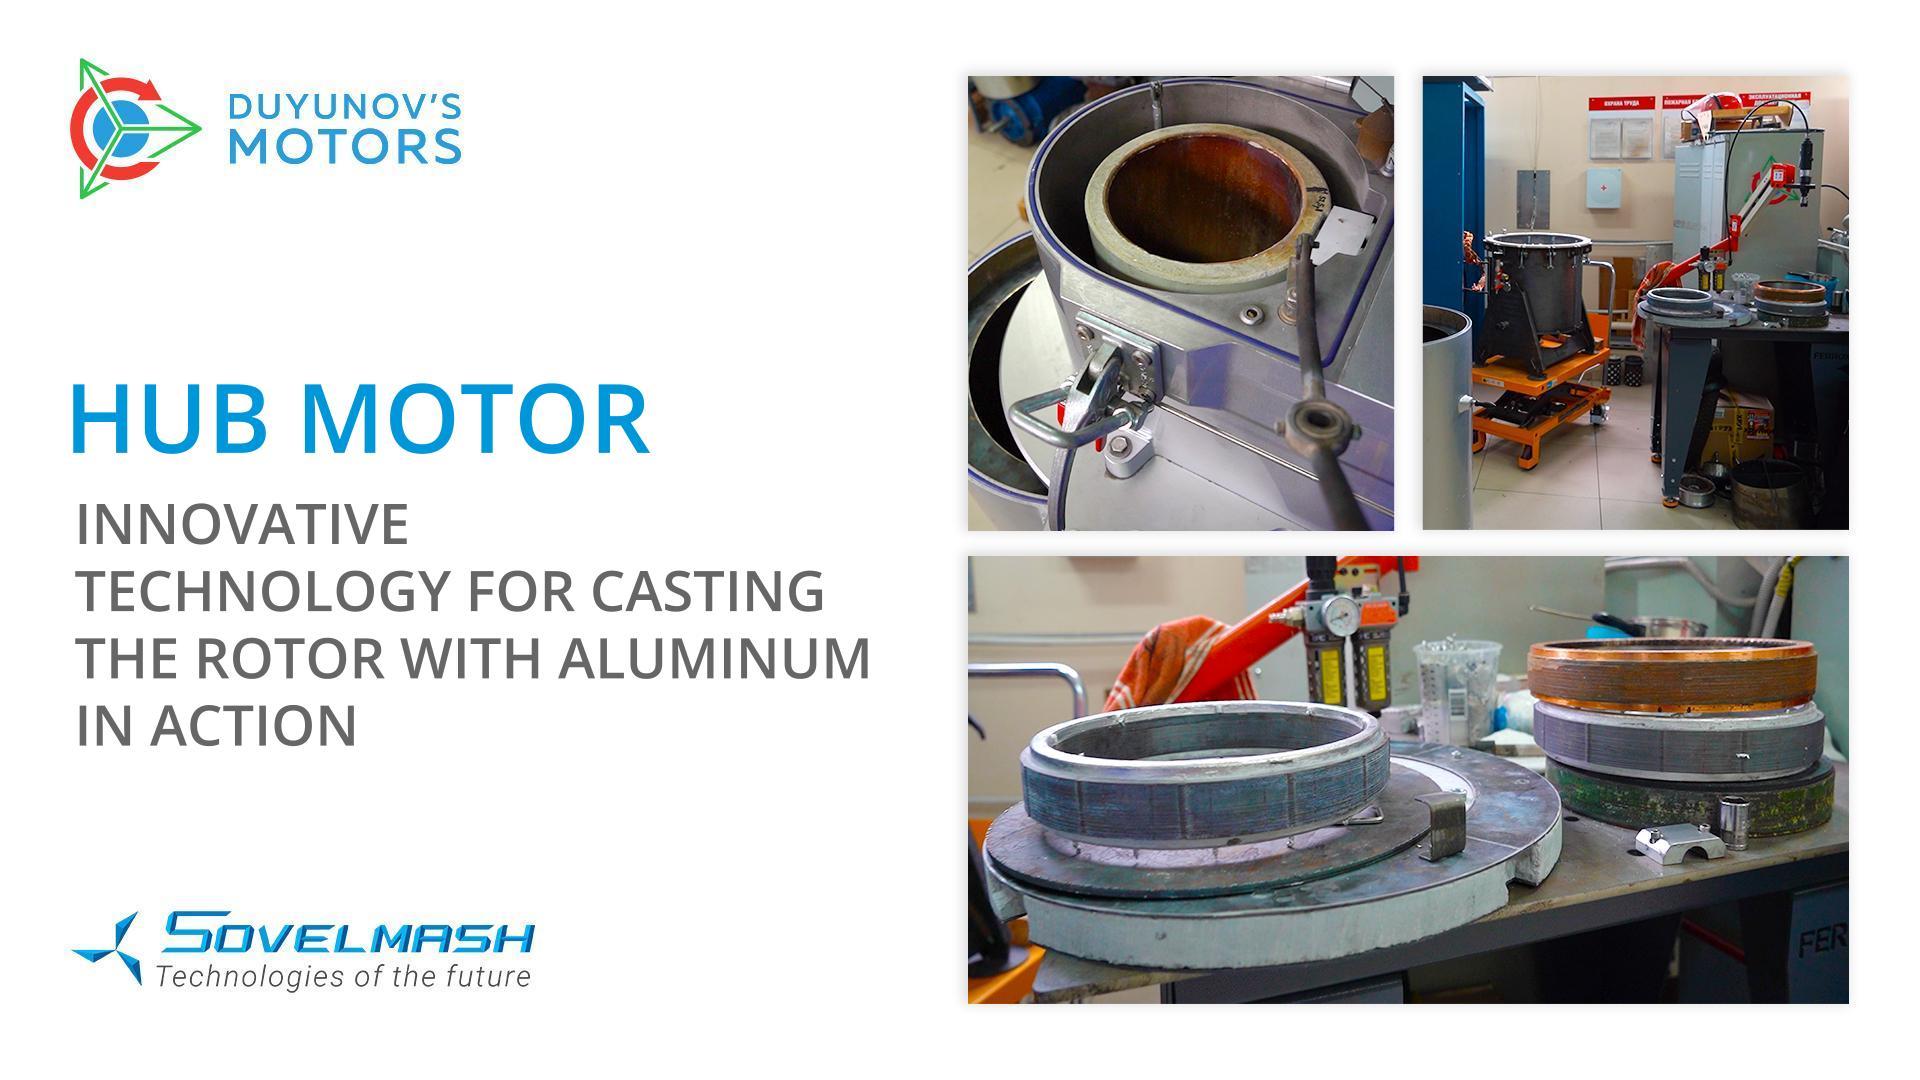 Hub motor: innovative technology for casting the rotor with aluminum in action